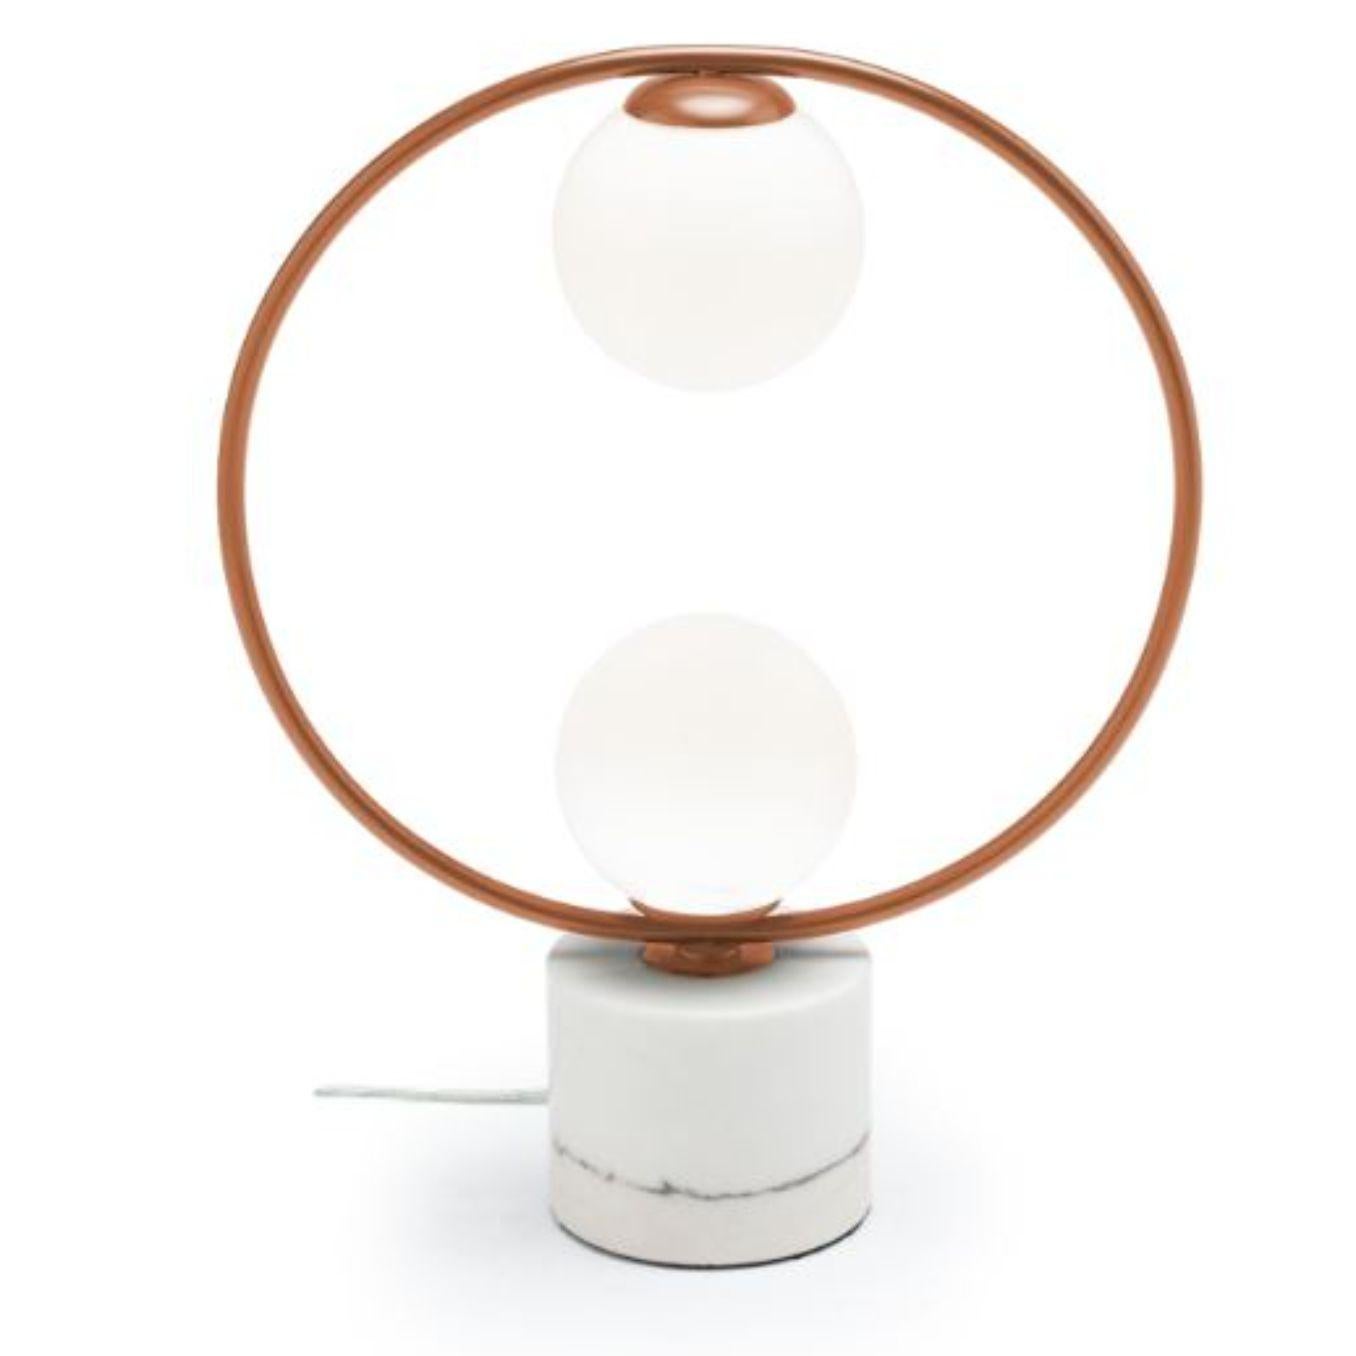 Copper Loop table II lamp with Marble Base by Dooq
Dimensions: W 43 x D 15 x H 53 cm
Materials: lacquered metal, polished or brushed metal, copper, marble.
Also available in different colors and materials. 

Information:
230V/50Hz
2 x max. G9
4W